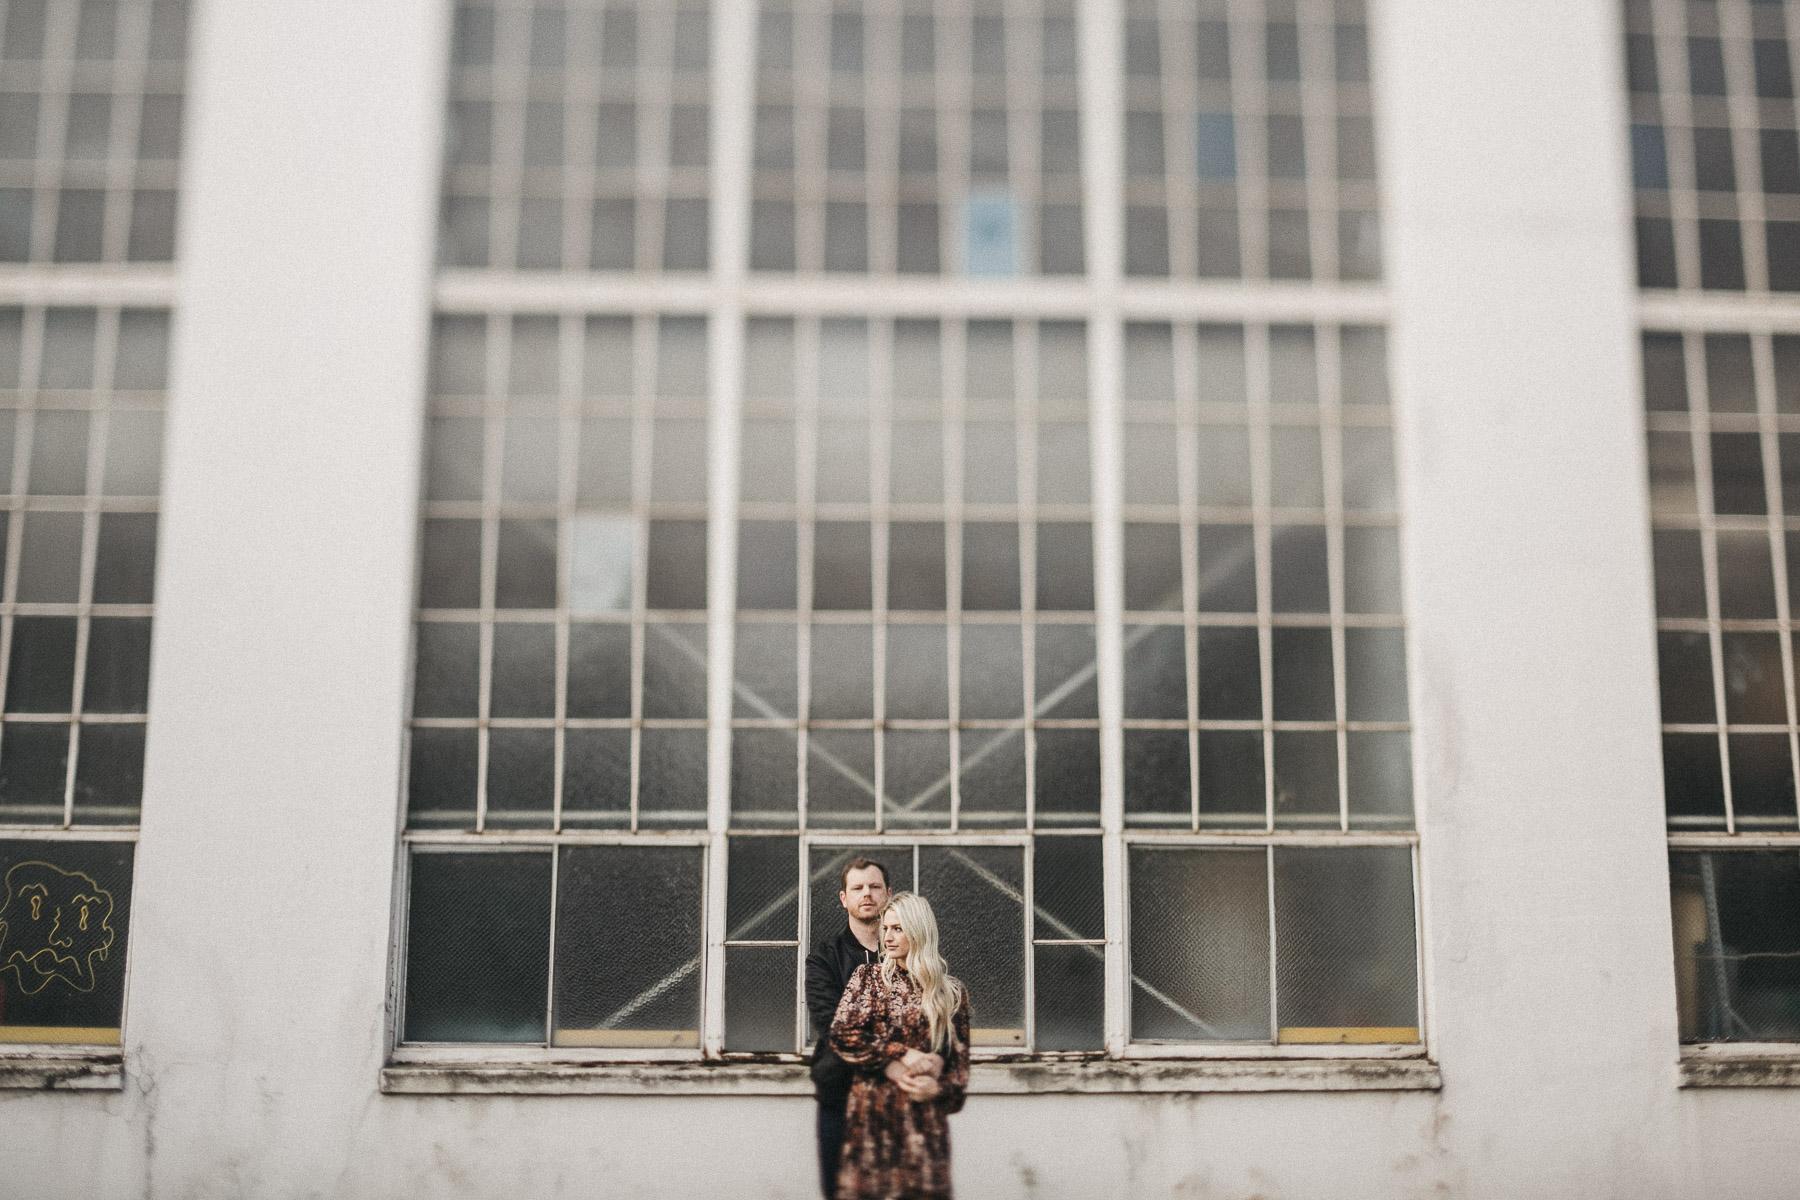 A couple portrait in front of a white wall with windows